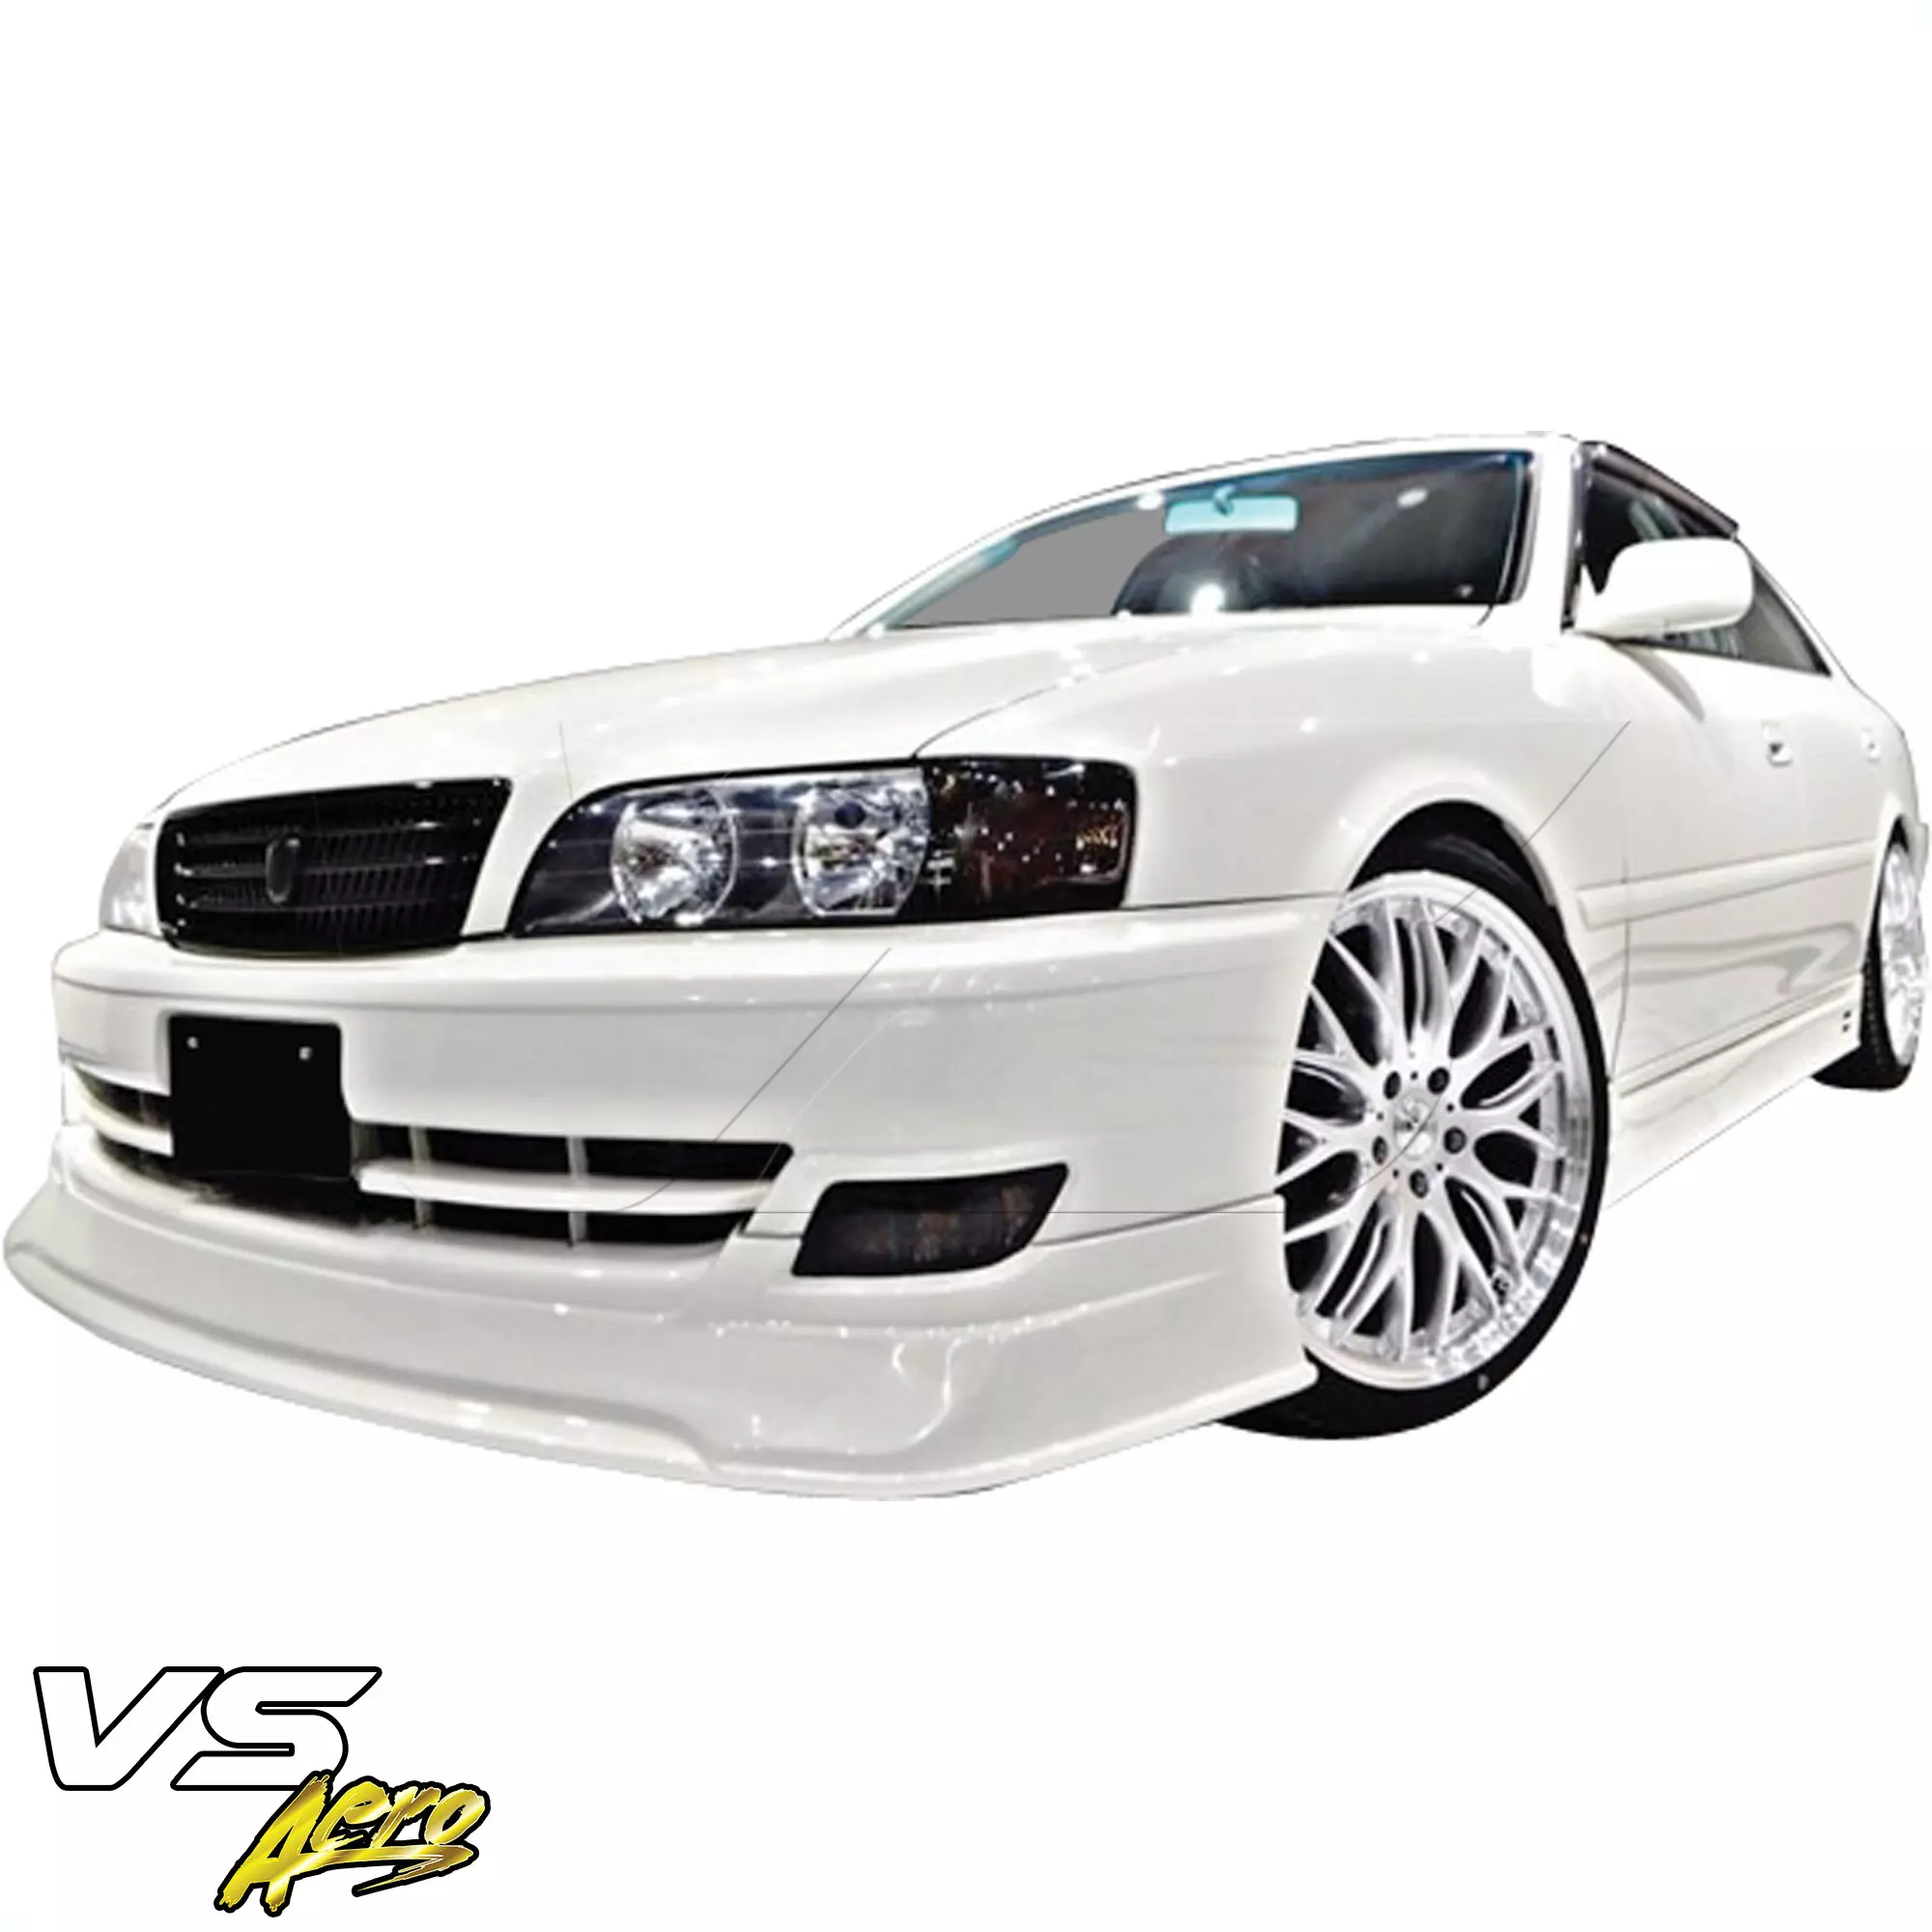 VSaero FRP TRAU Late Front Lip Valance > Toyota Chaser JZX100 1999-2000 - Image 27